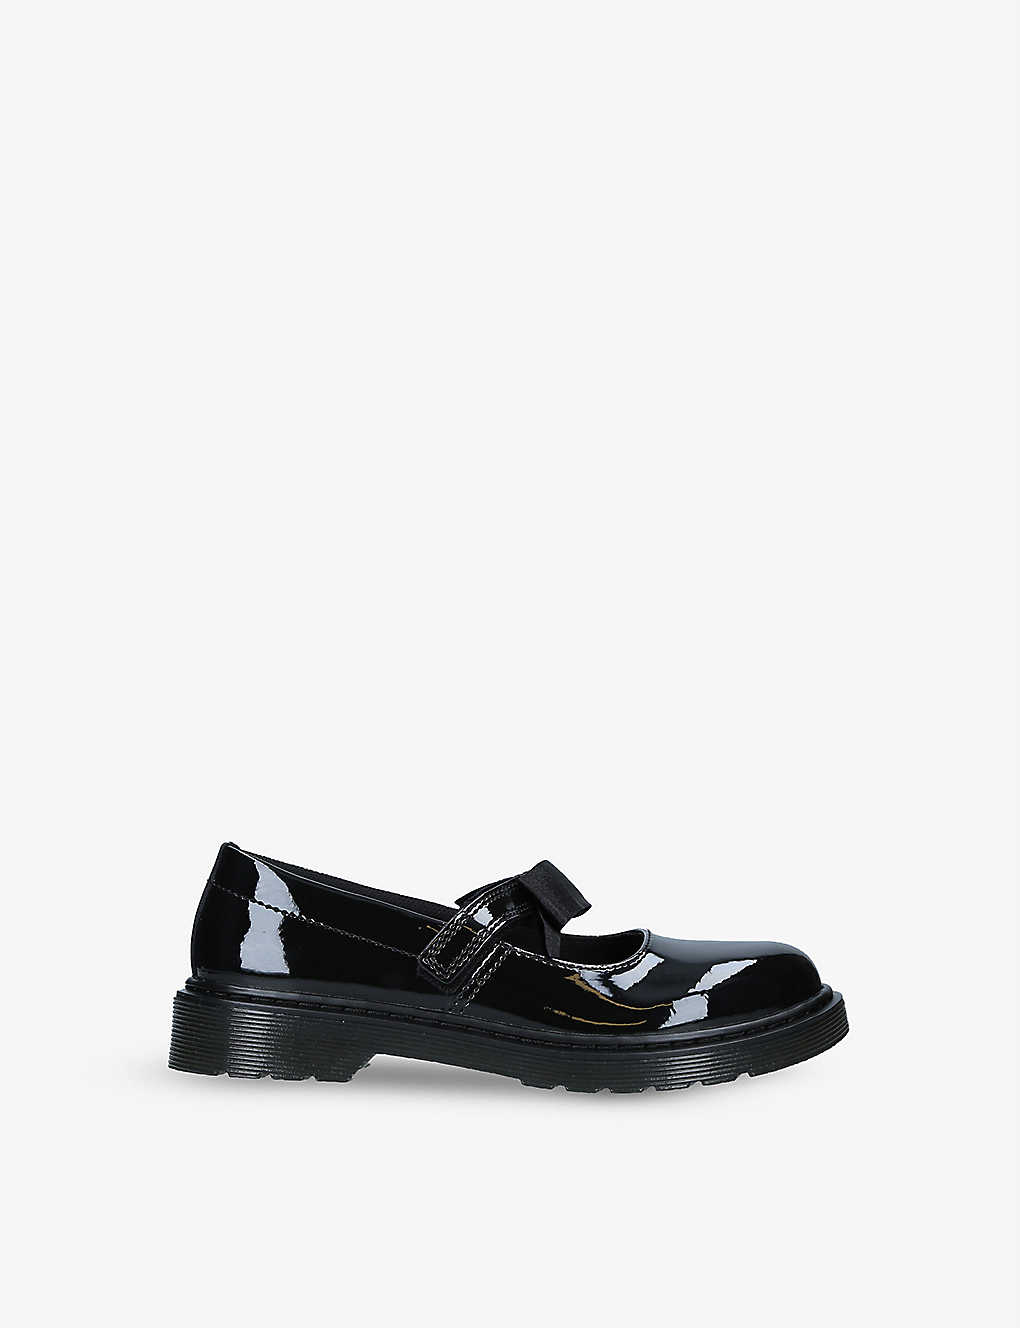 Dr. Martens' Dr. Martens Girls Black Kids Maccy Ii Patent Leather Shoes 9-10 Years